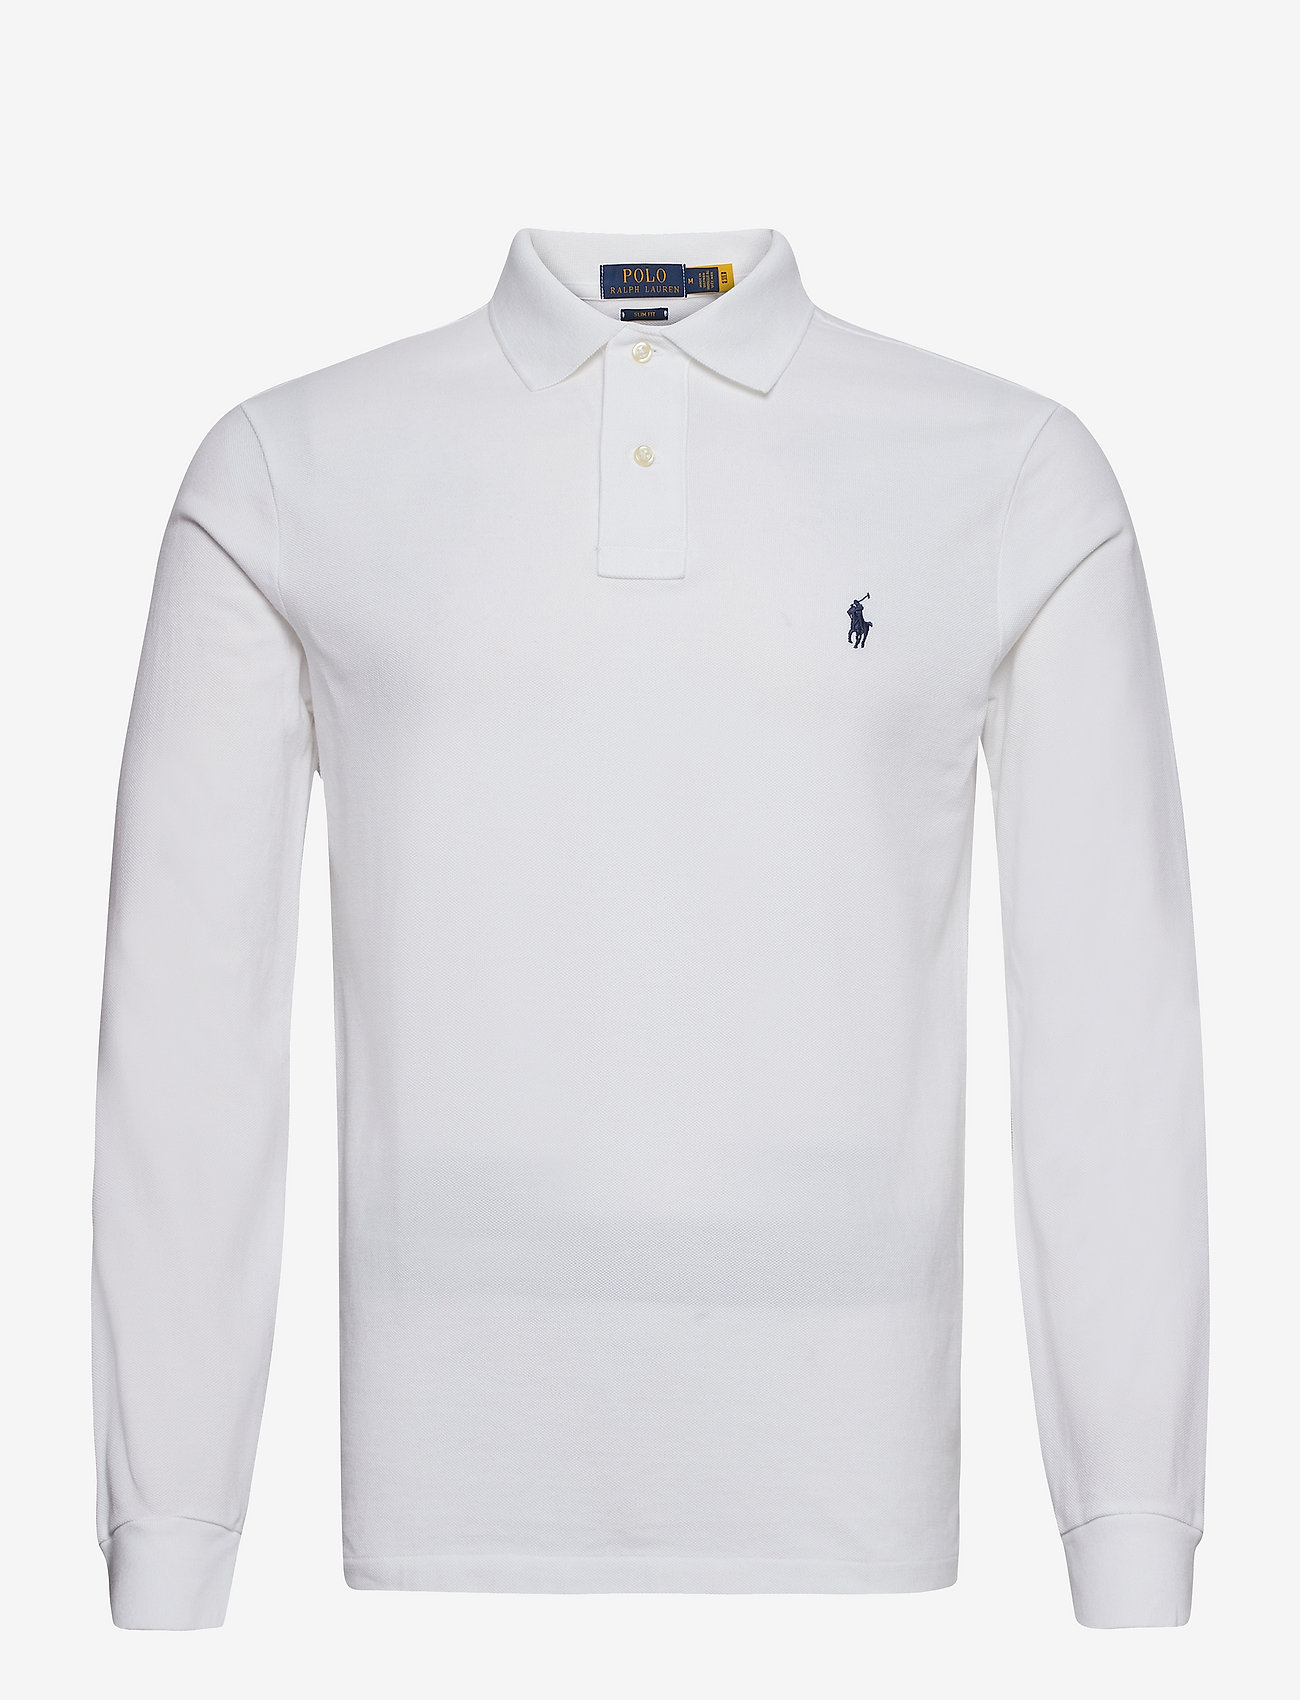 Buy > long sleeve polo with collar > in stock